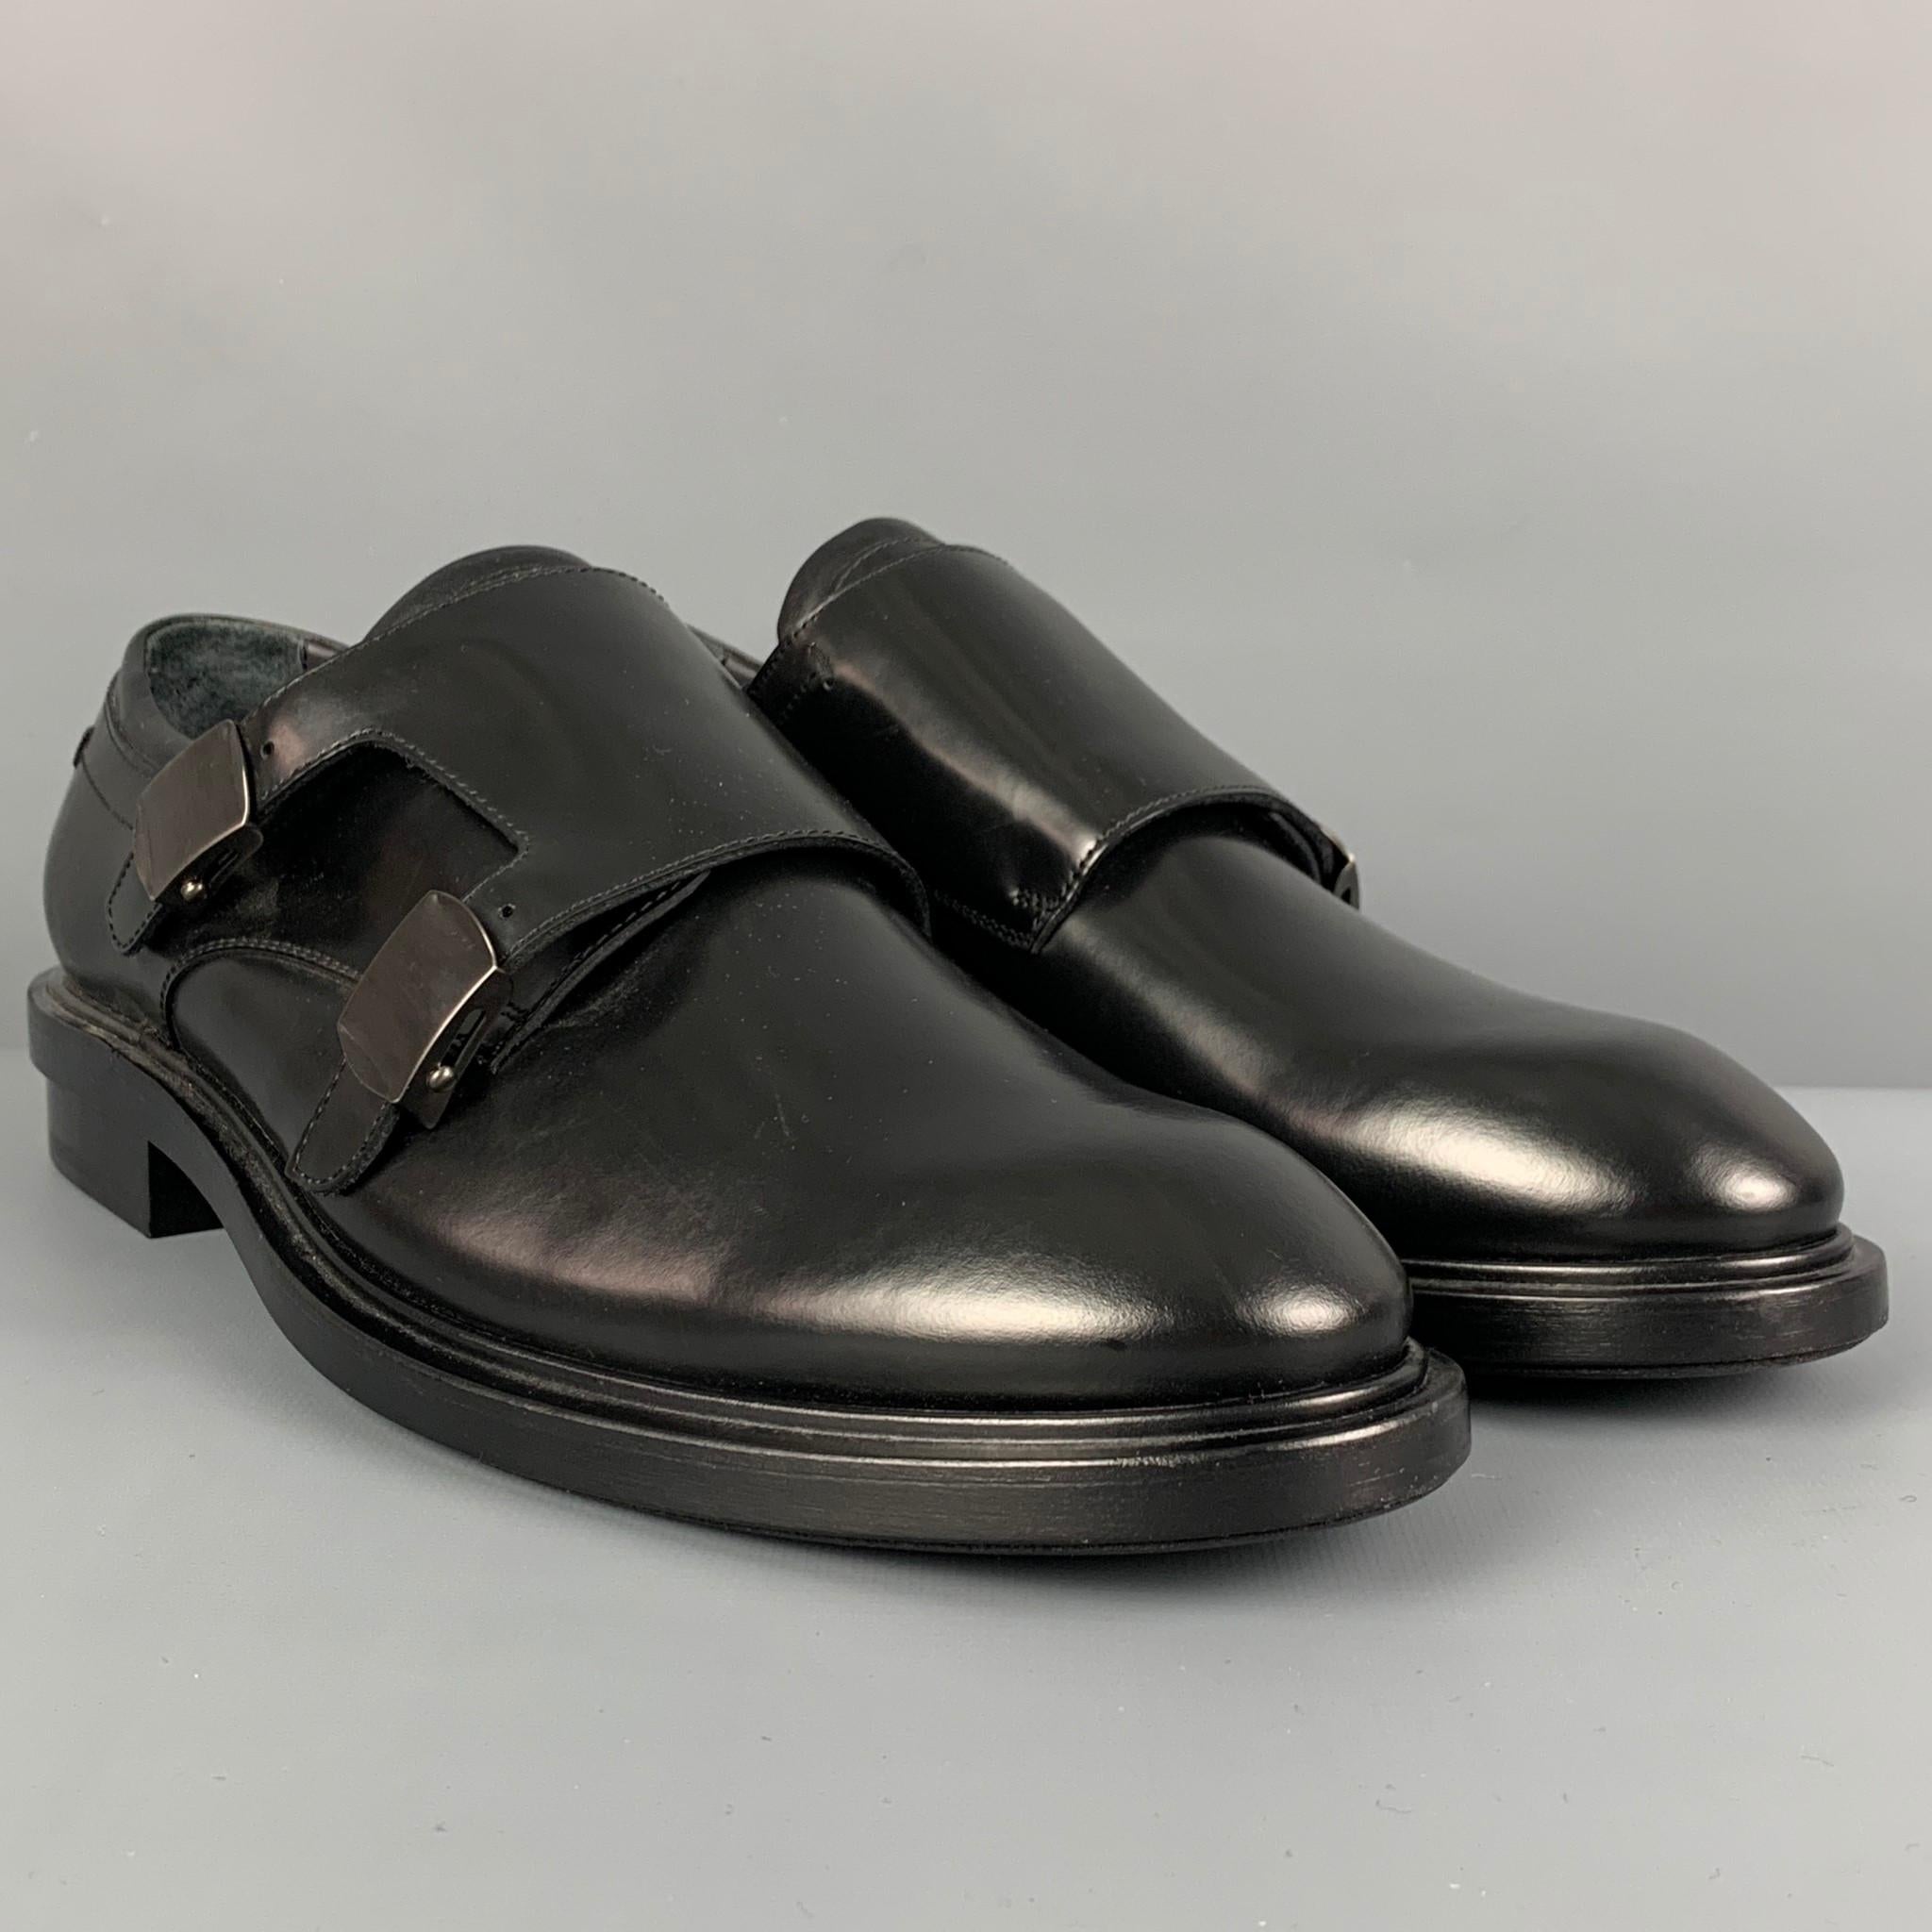 CALVIN KLEIN COLLECTION loafers comes in a black leather featuring a double mon strap and a round toe. Made in Italy.

Very Good Pre-Owned Condition.
Marked: 42

Outsole: 11.75 in. x 4.25 in. 